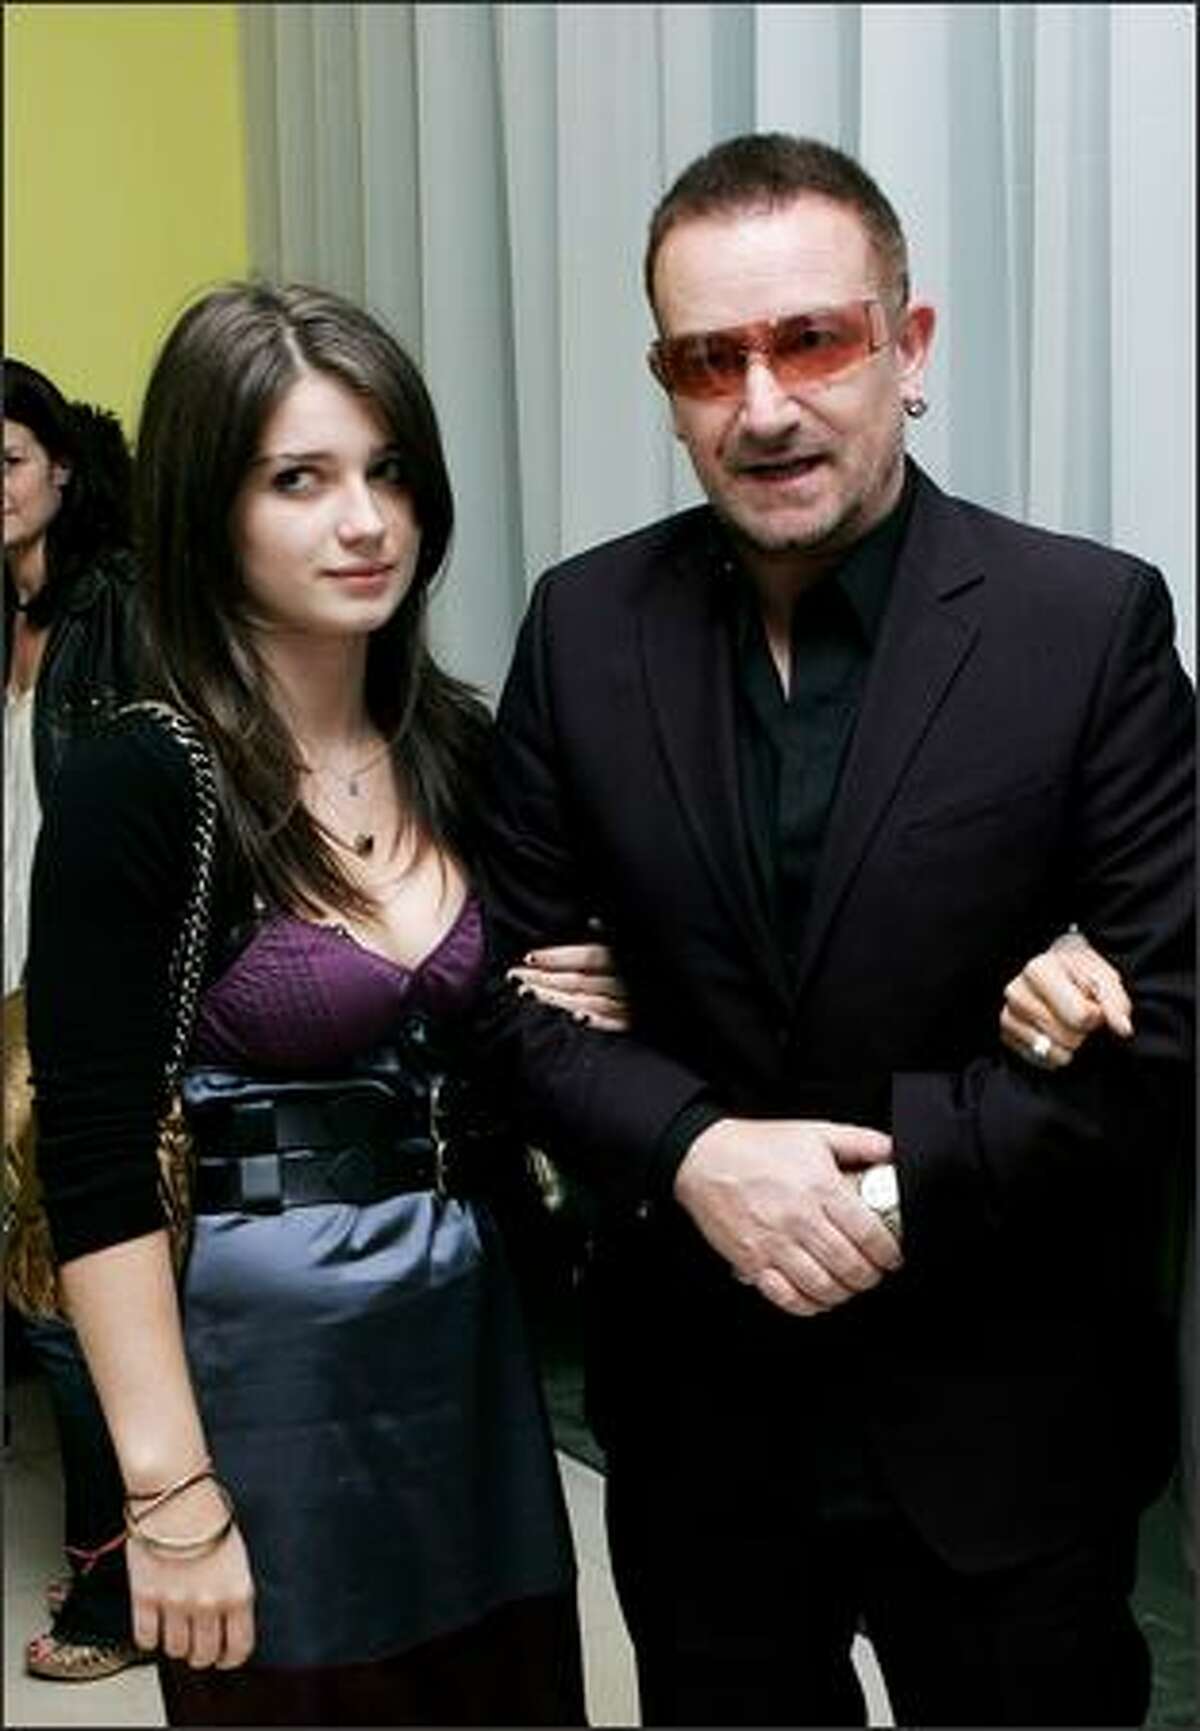 U2 frontman Bono and his guest arrive at the afterparty following "Across The Universe" at Bungalow 8, St Martin's Lane Hotel, on September 26, 2007 in London, England.